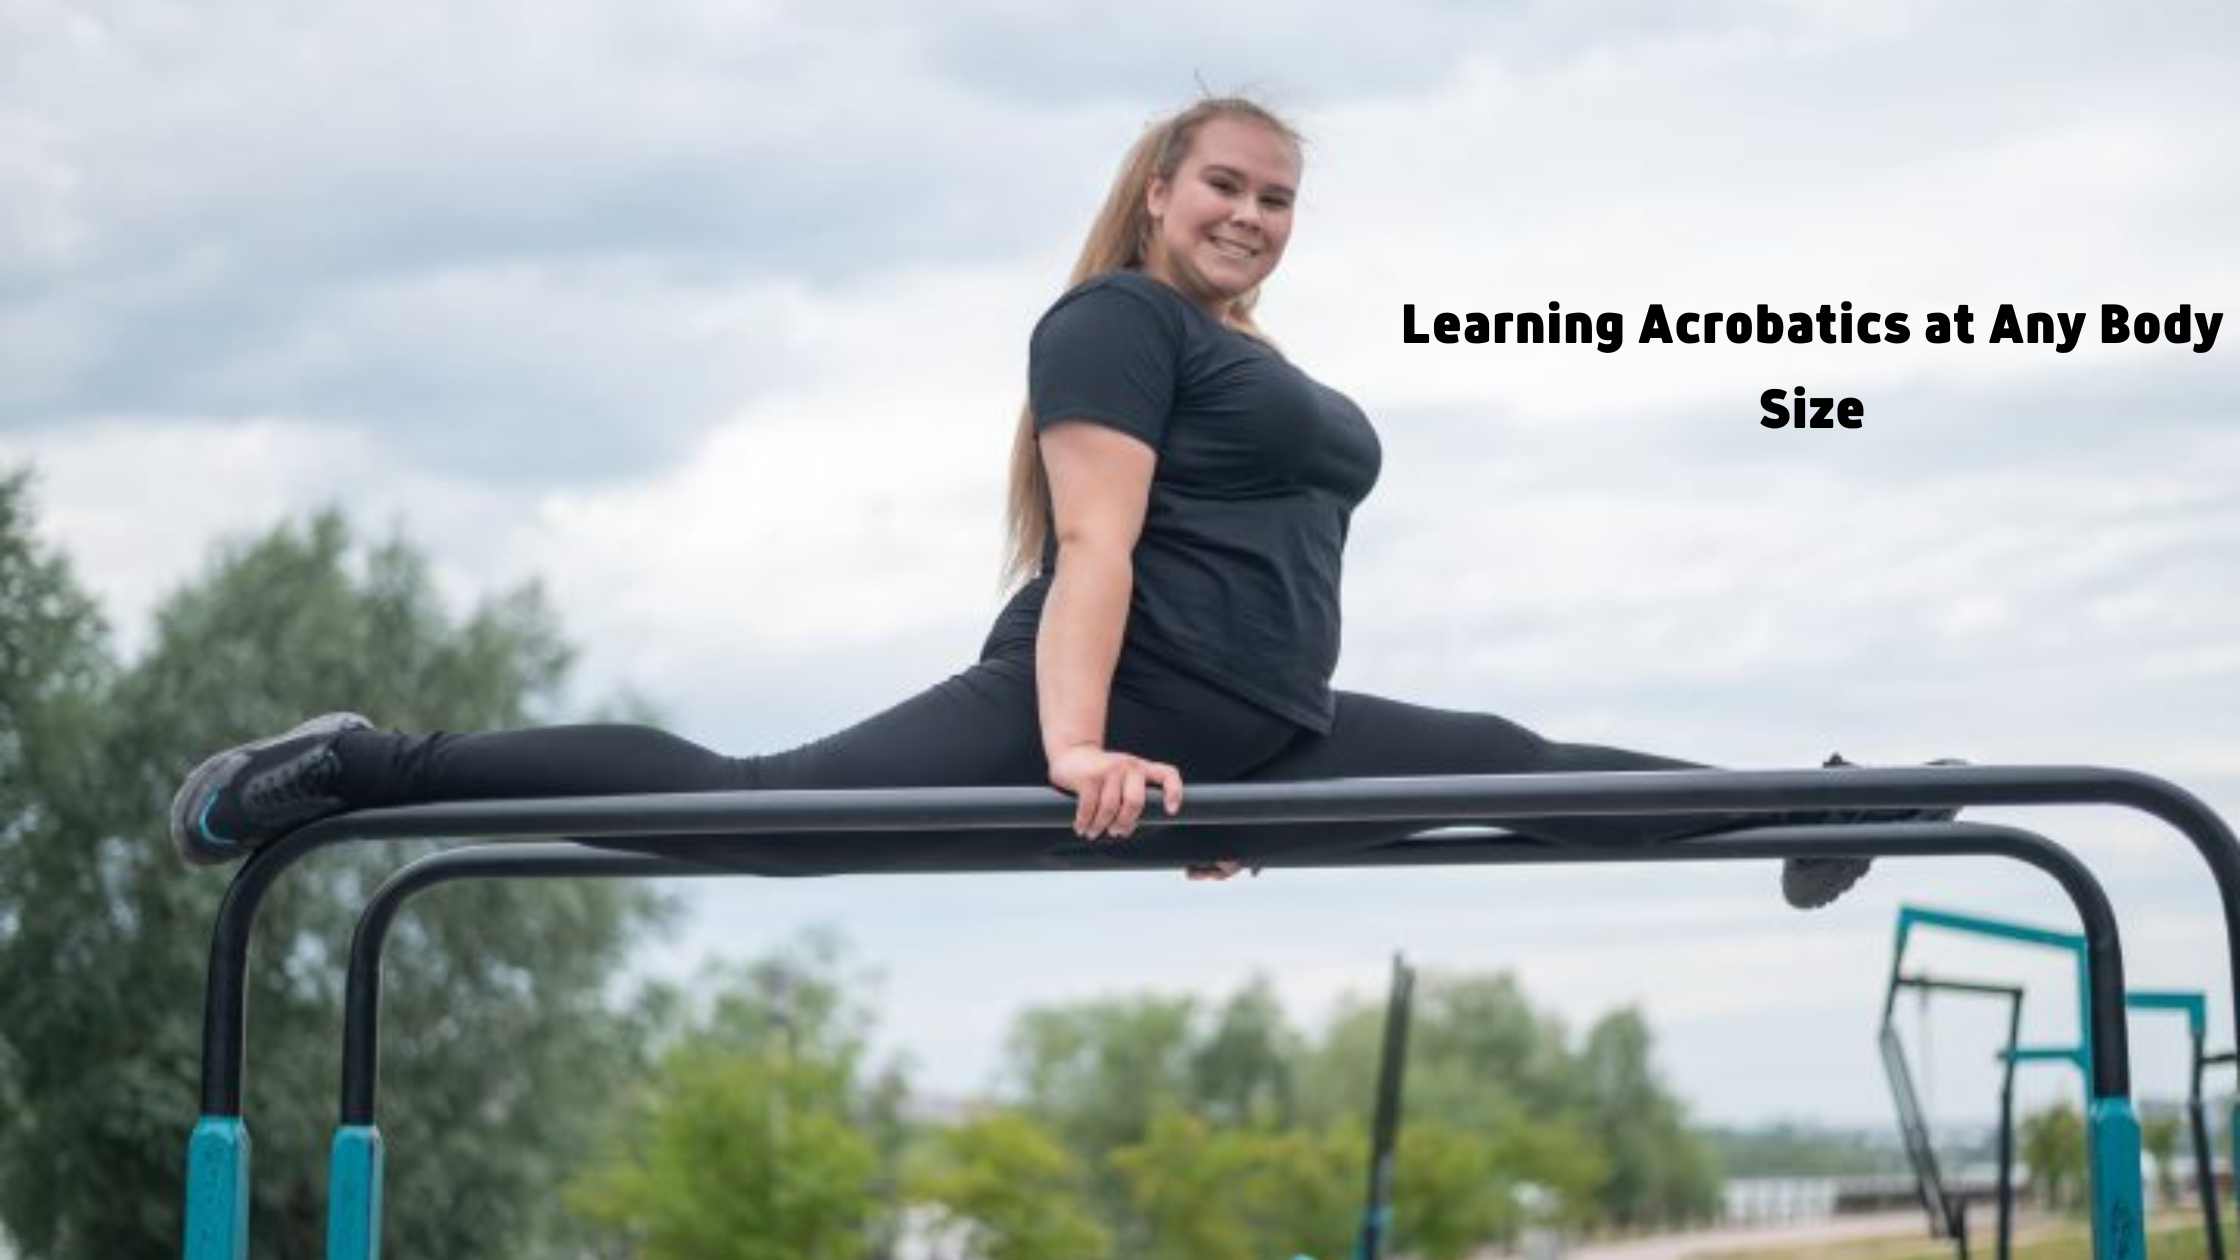 Learning Acrobatics at Any Body Size